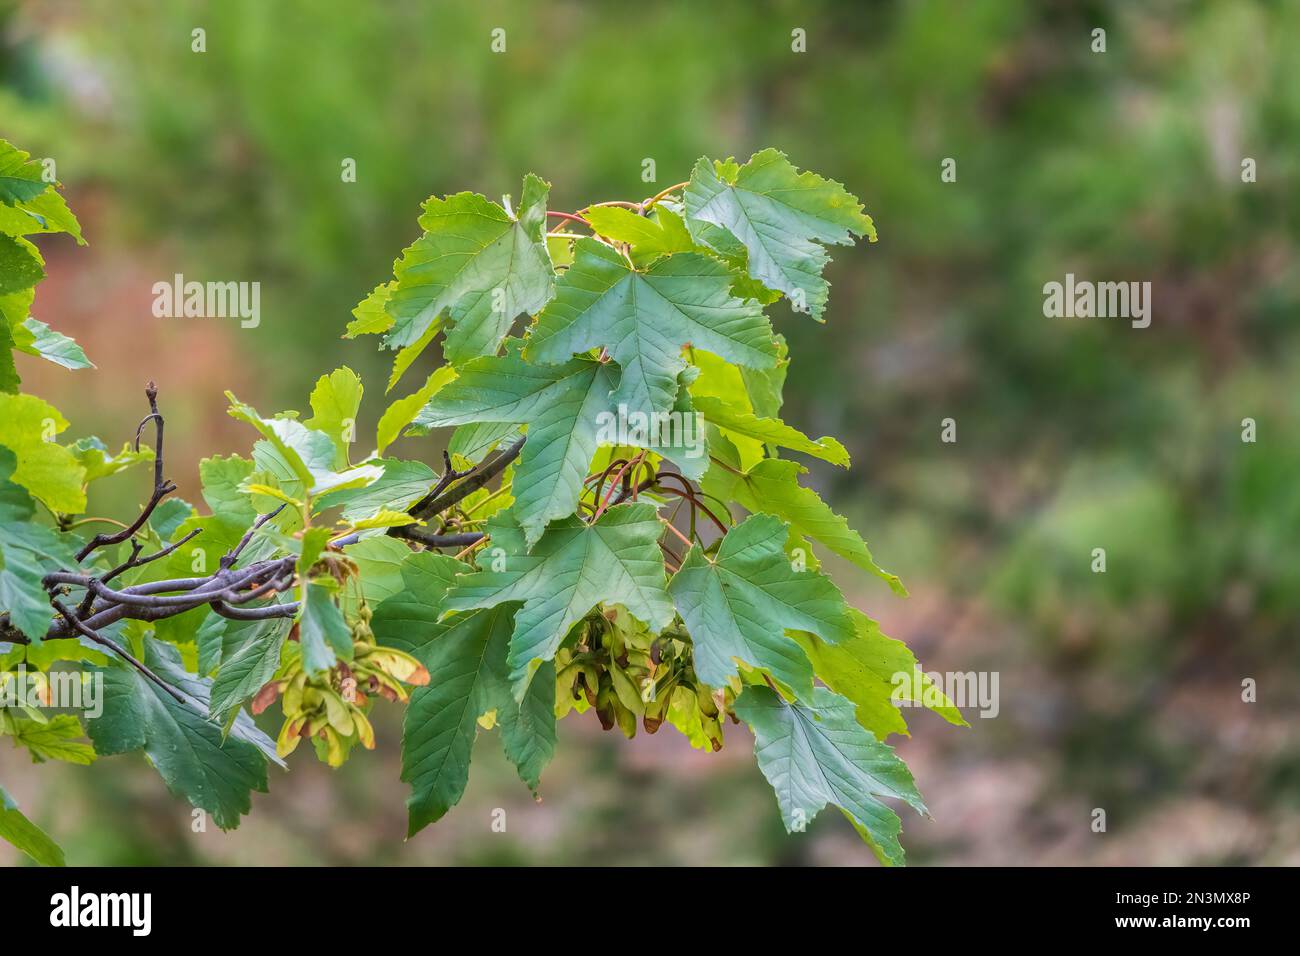 Summer branches of maple tree with green leaves and seeds. Summer background with copy space. Close-up of maple seeds, disamaras Stock Photo